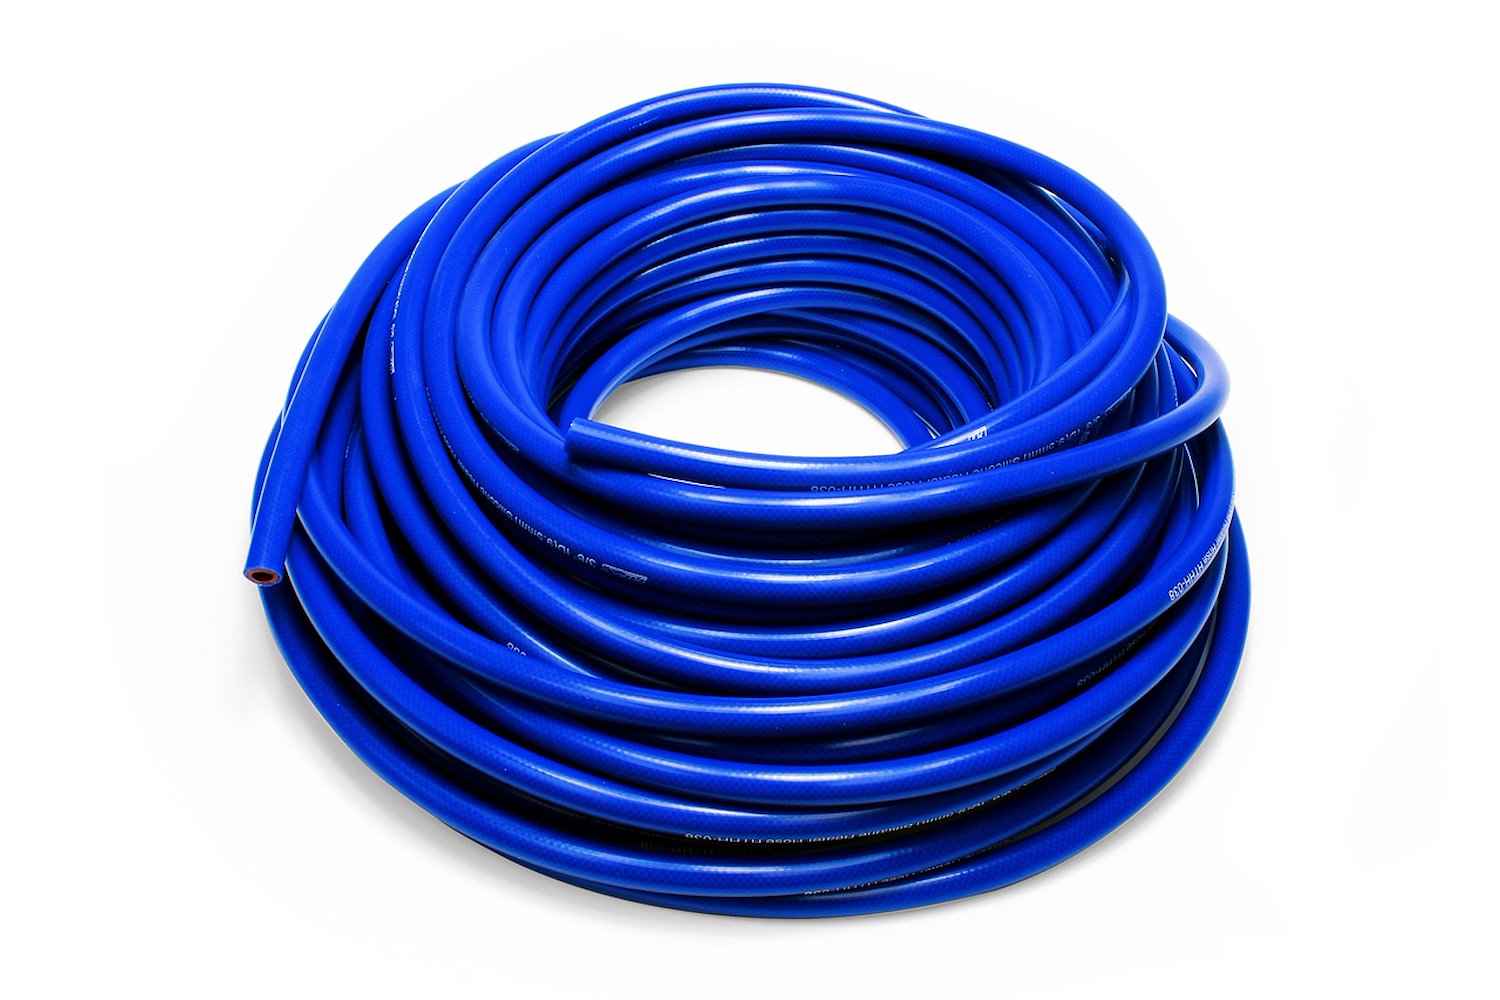 HTHH-038-BLUEx50 Silicone Heater Hose Tubing, High-Temp 1-Ply Reinforced, 3/8 in. ID, 50 ft. Roll, Blue